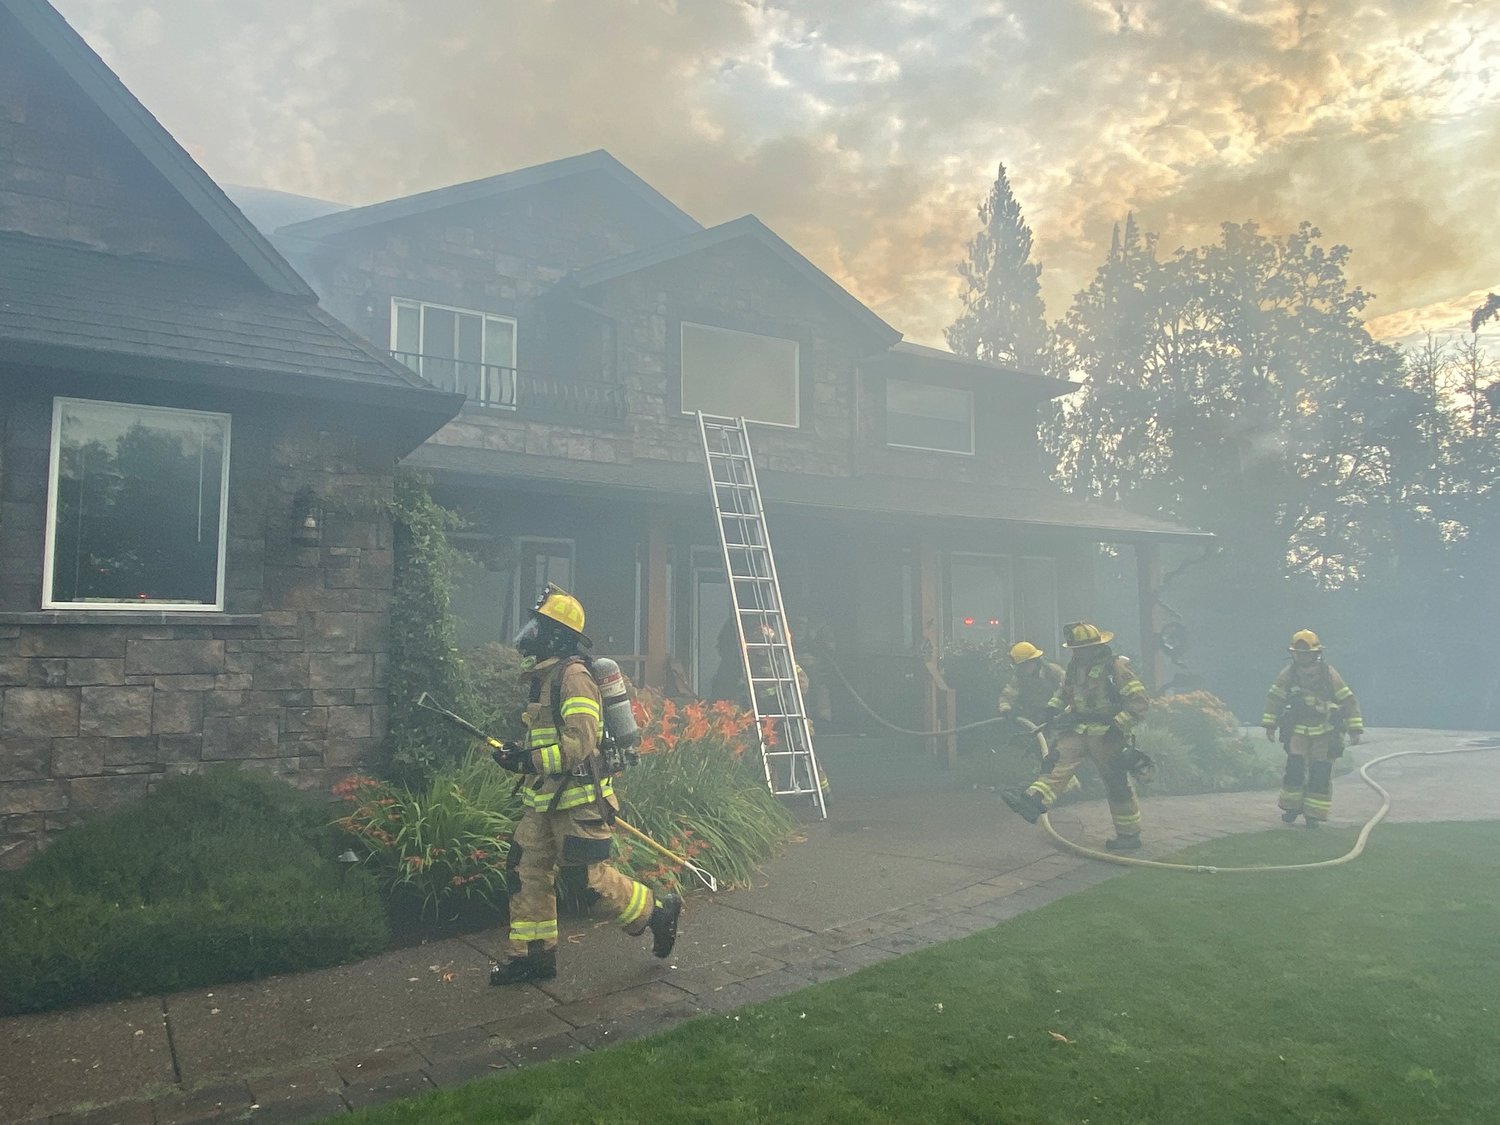 Firefighters work to extinguish a structure fire at a home in the 1400 block of Northwest 304th Circle in Ridgefield on Aug. 1. 